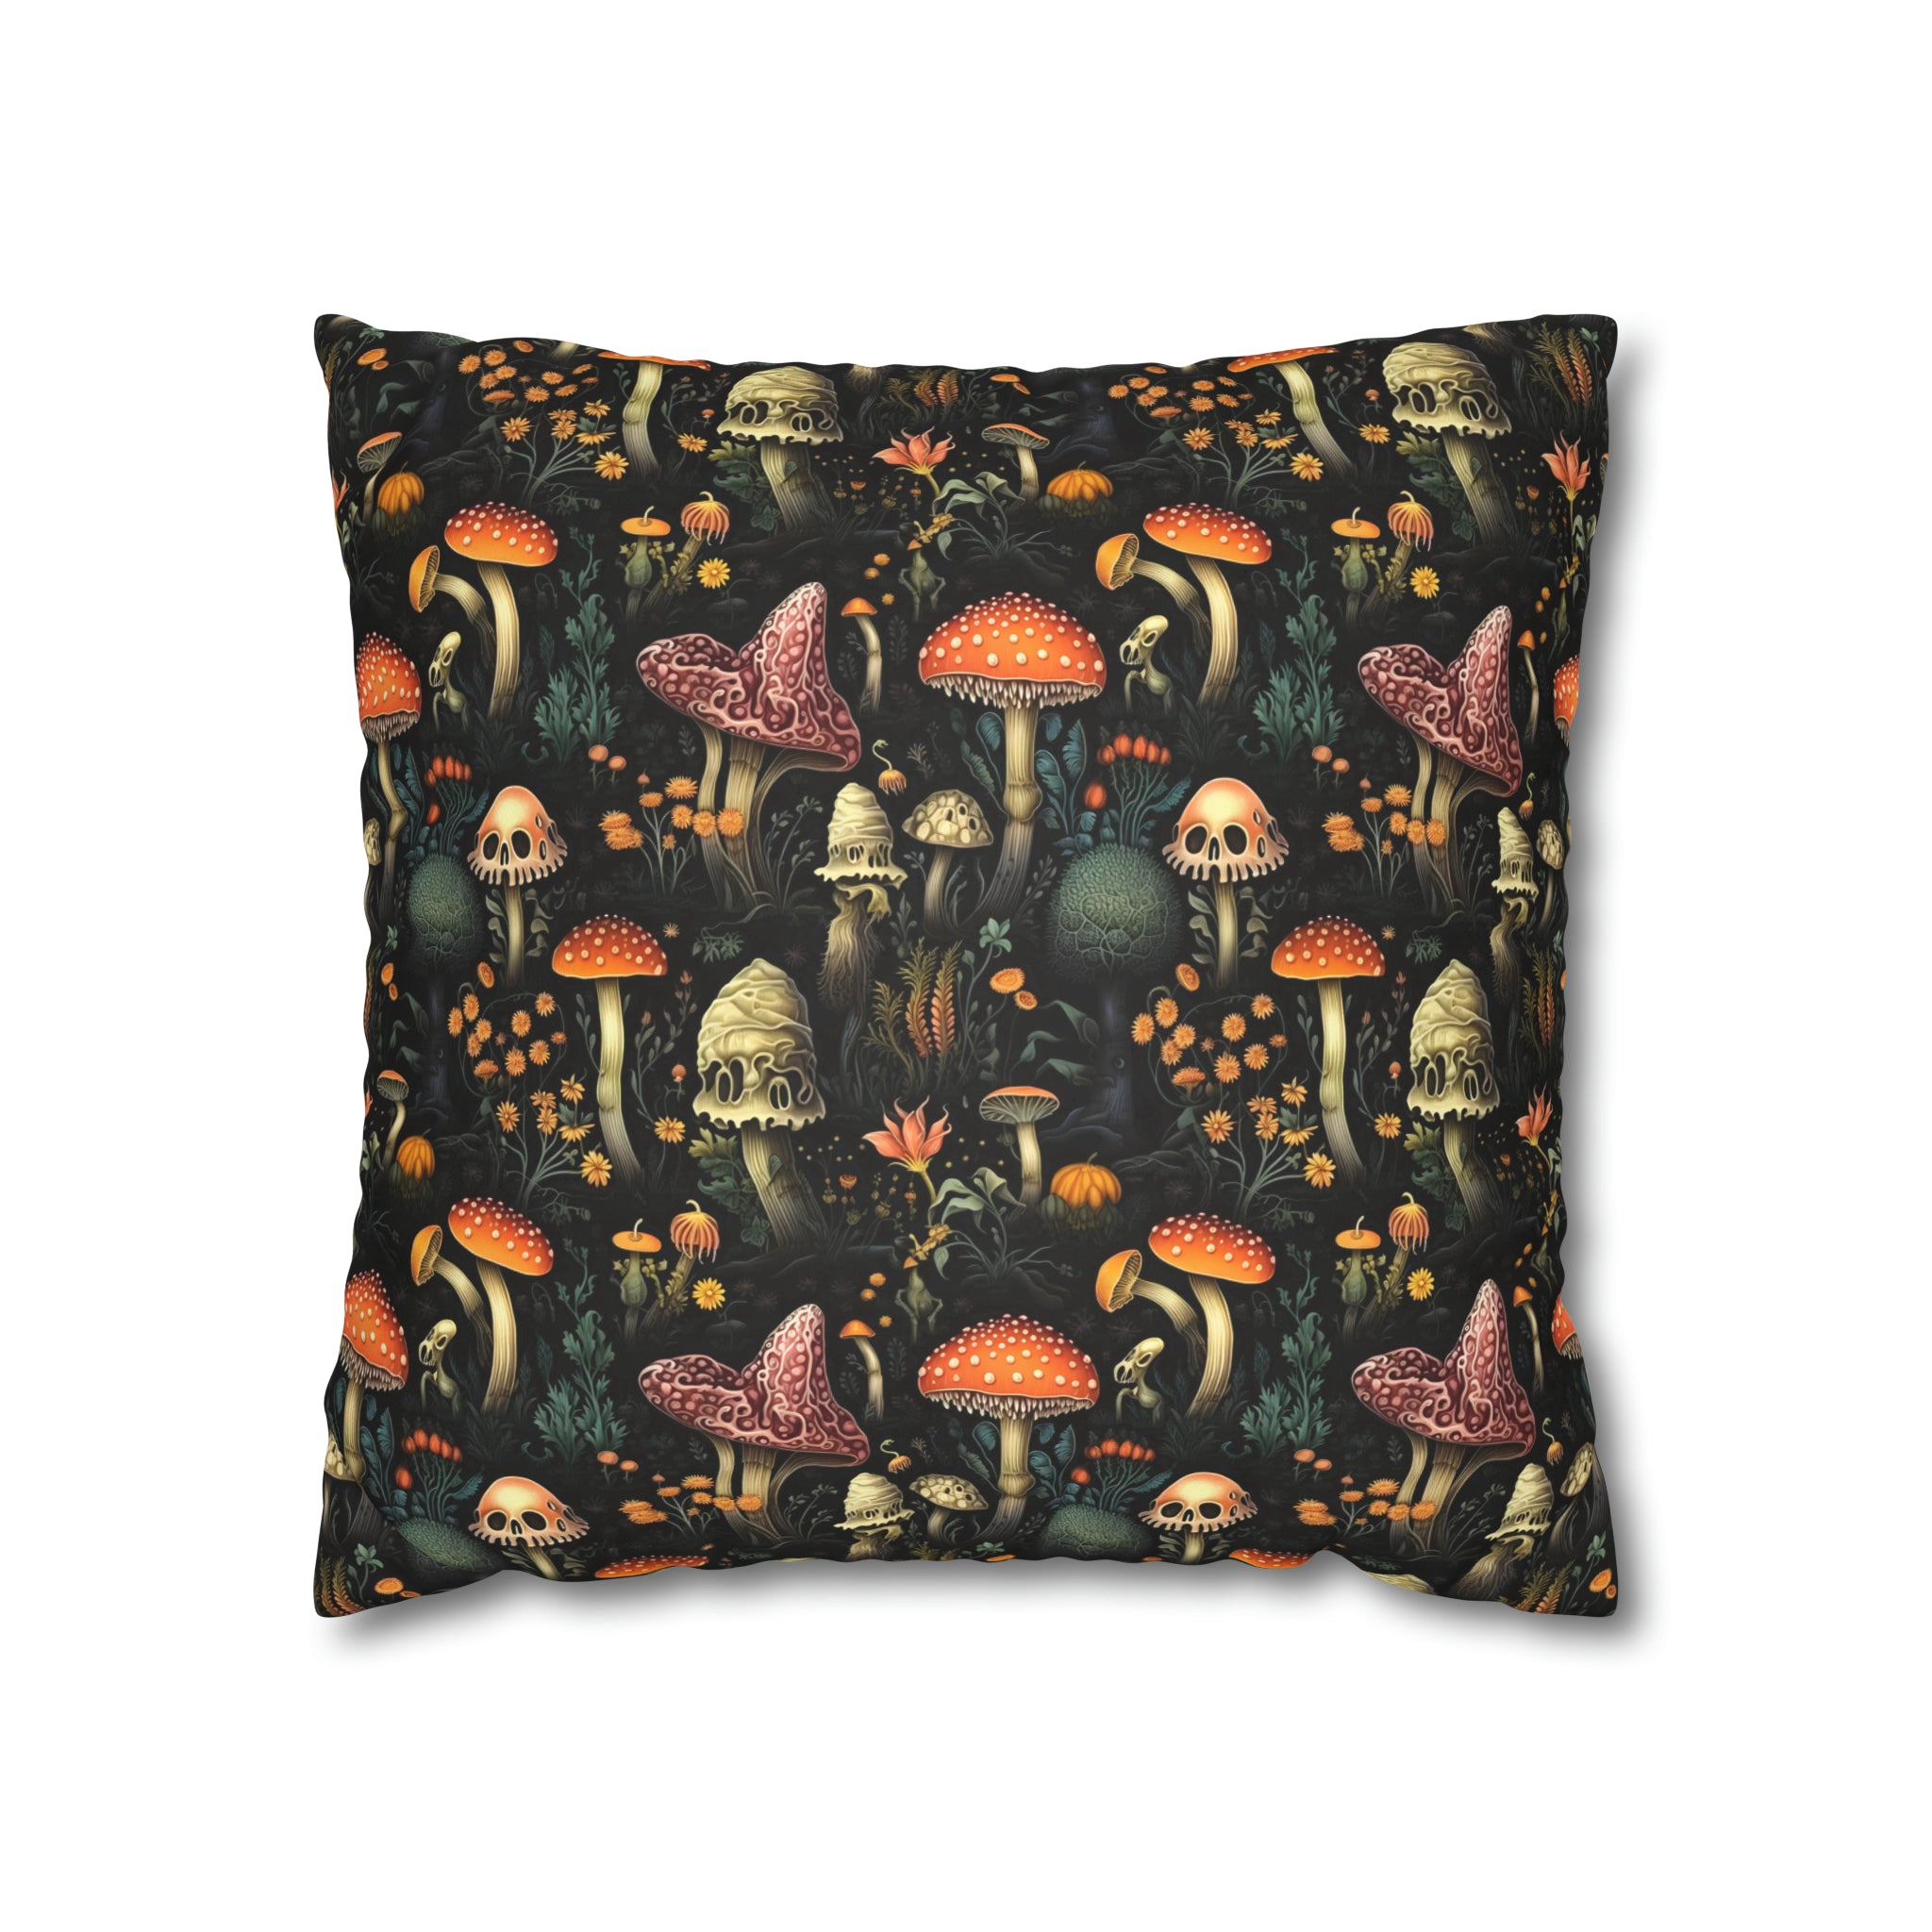 Dark Dweller Mushroom Faux Suede Pillow or Pillow Cover